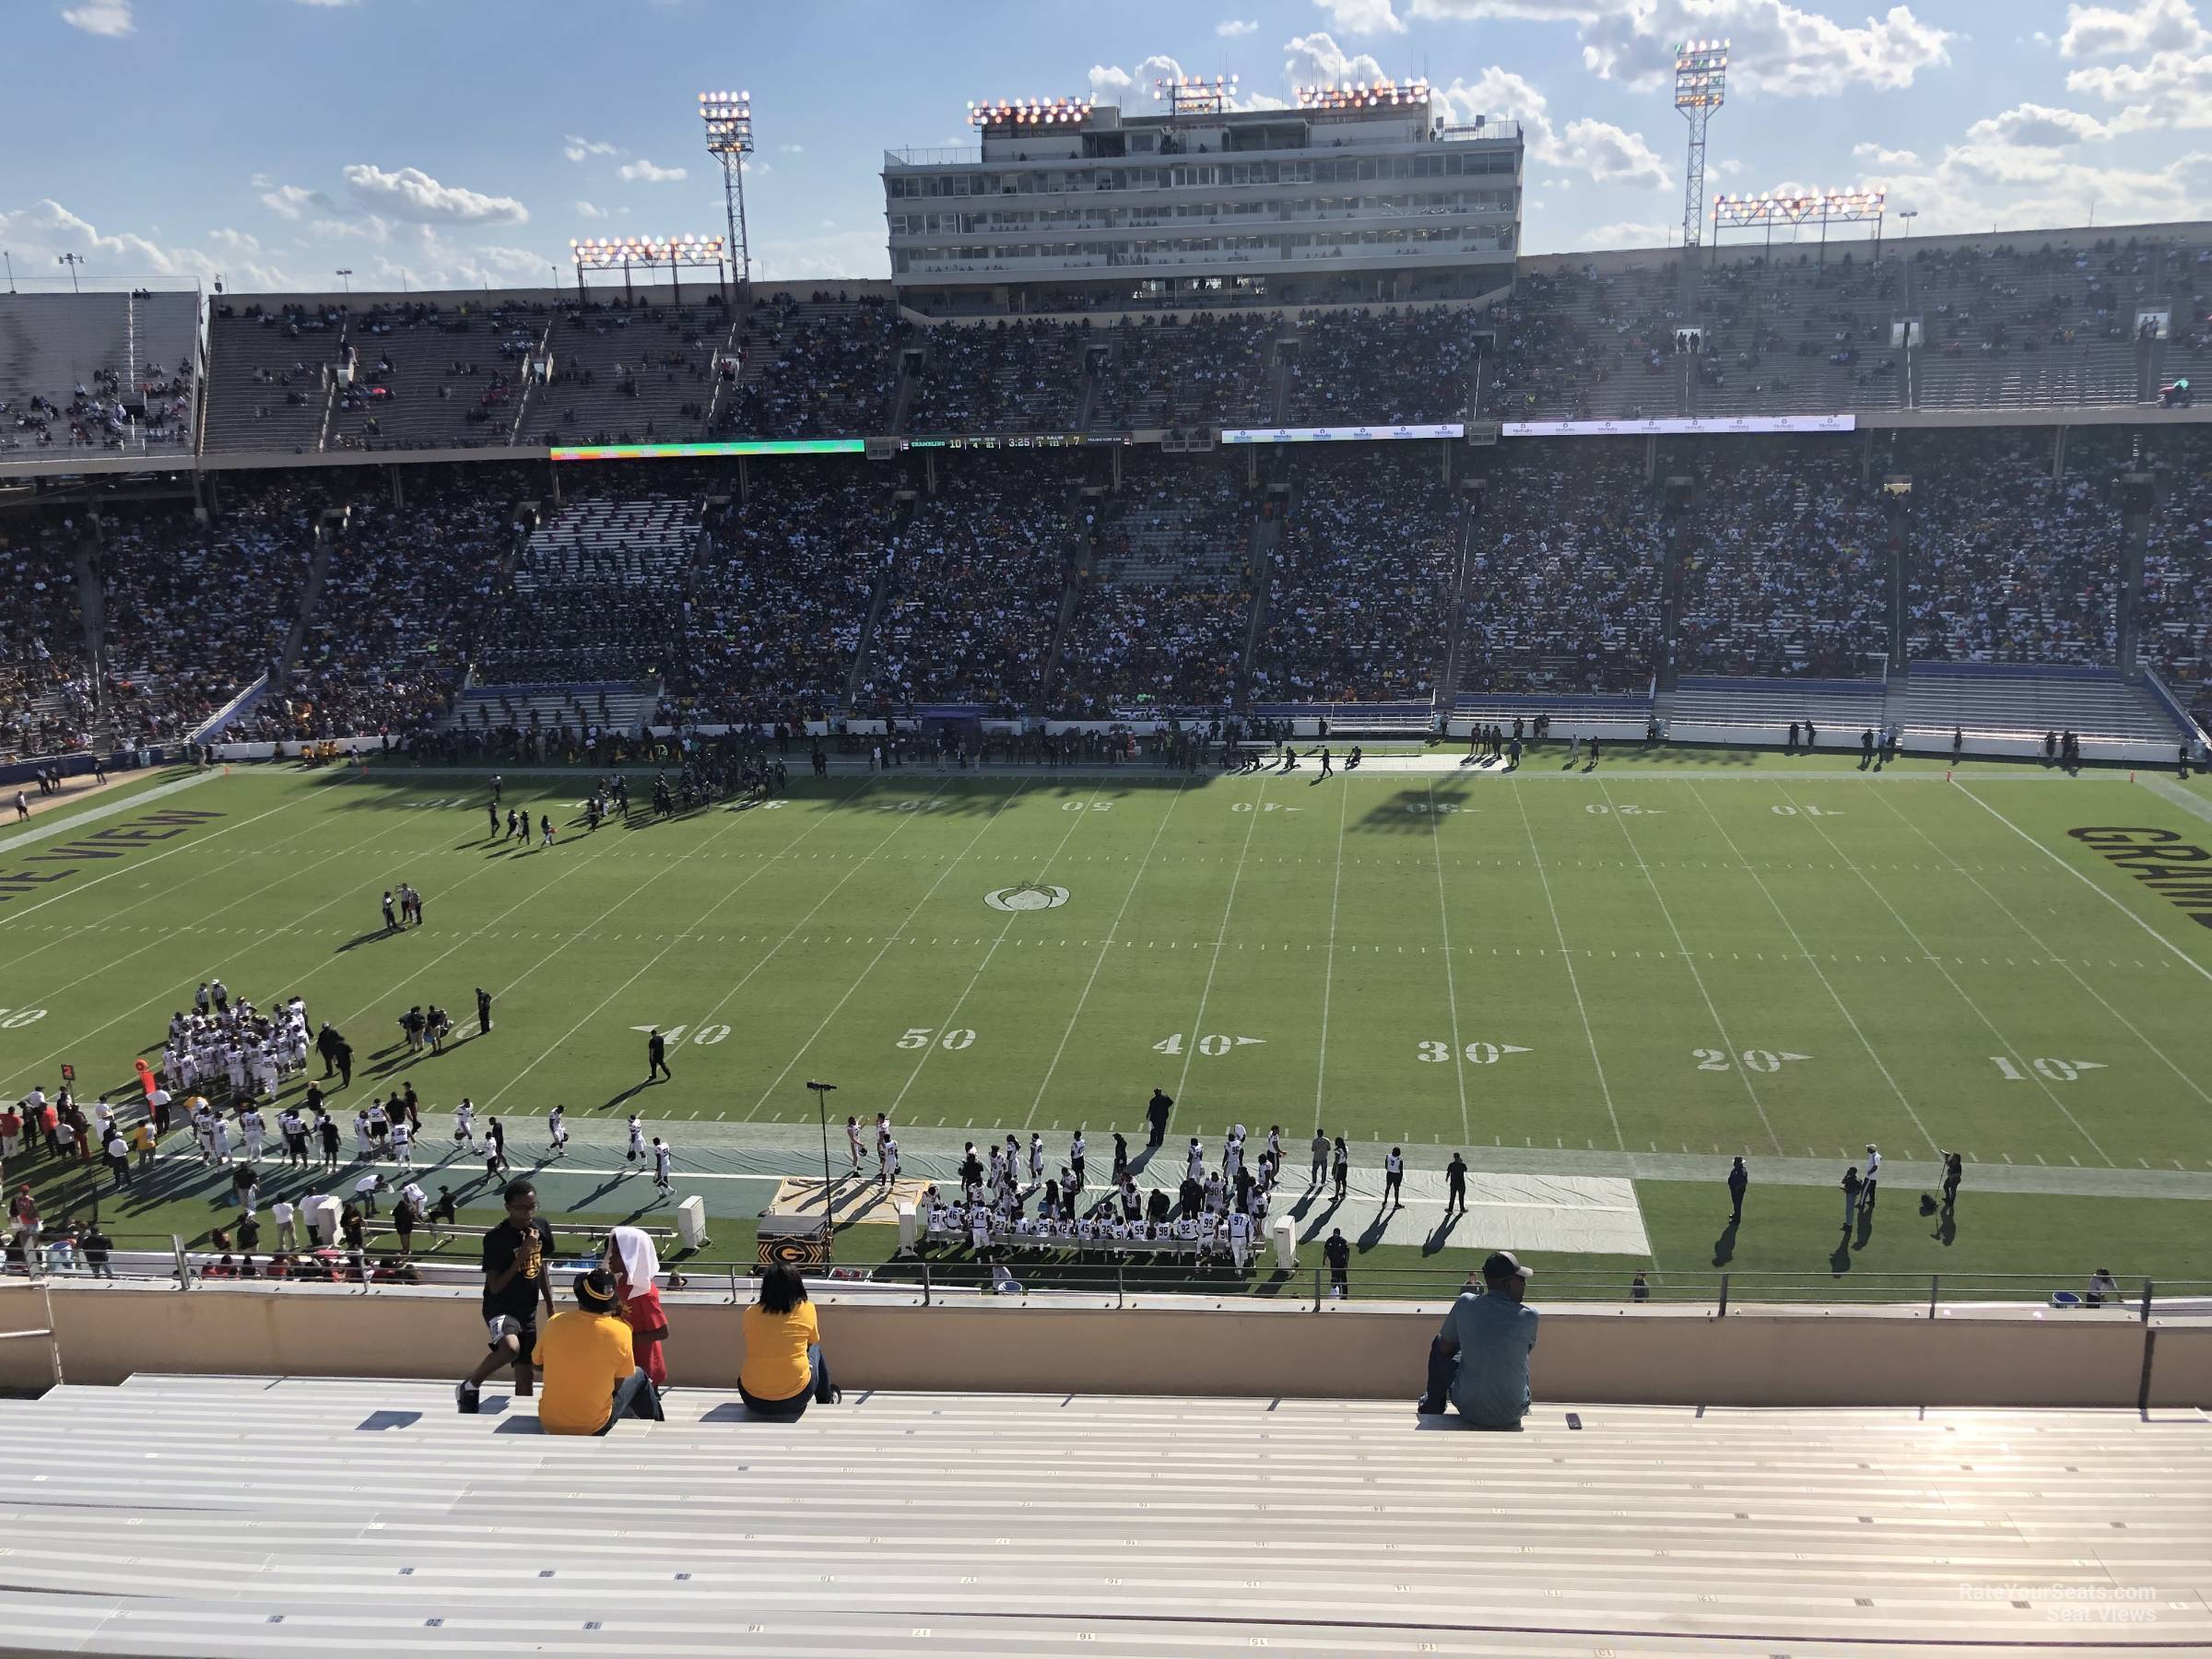 section 127, row 16 seat view  - cotton bowl